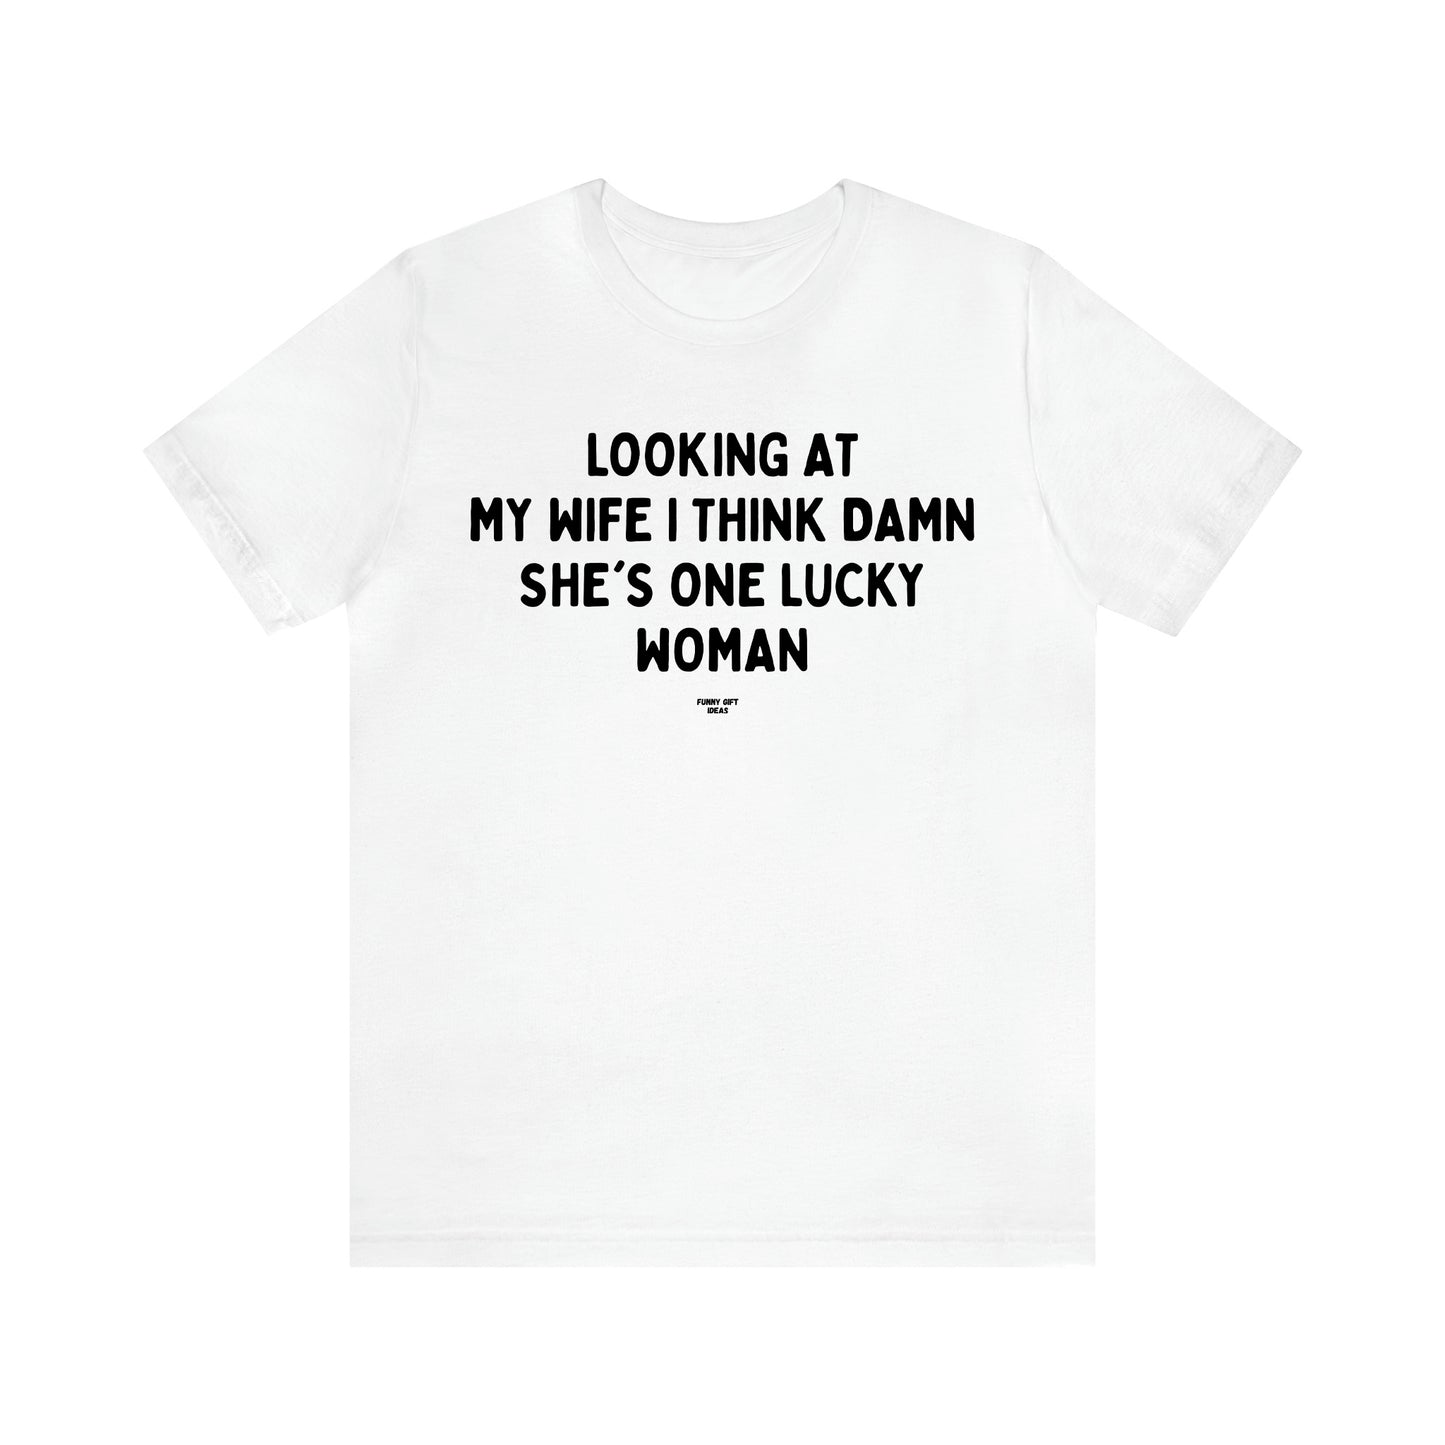 Men's T Shirts Looking at My Wife I Think Damn She's One Lucky Woman - Funny Gift Ideas